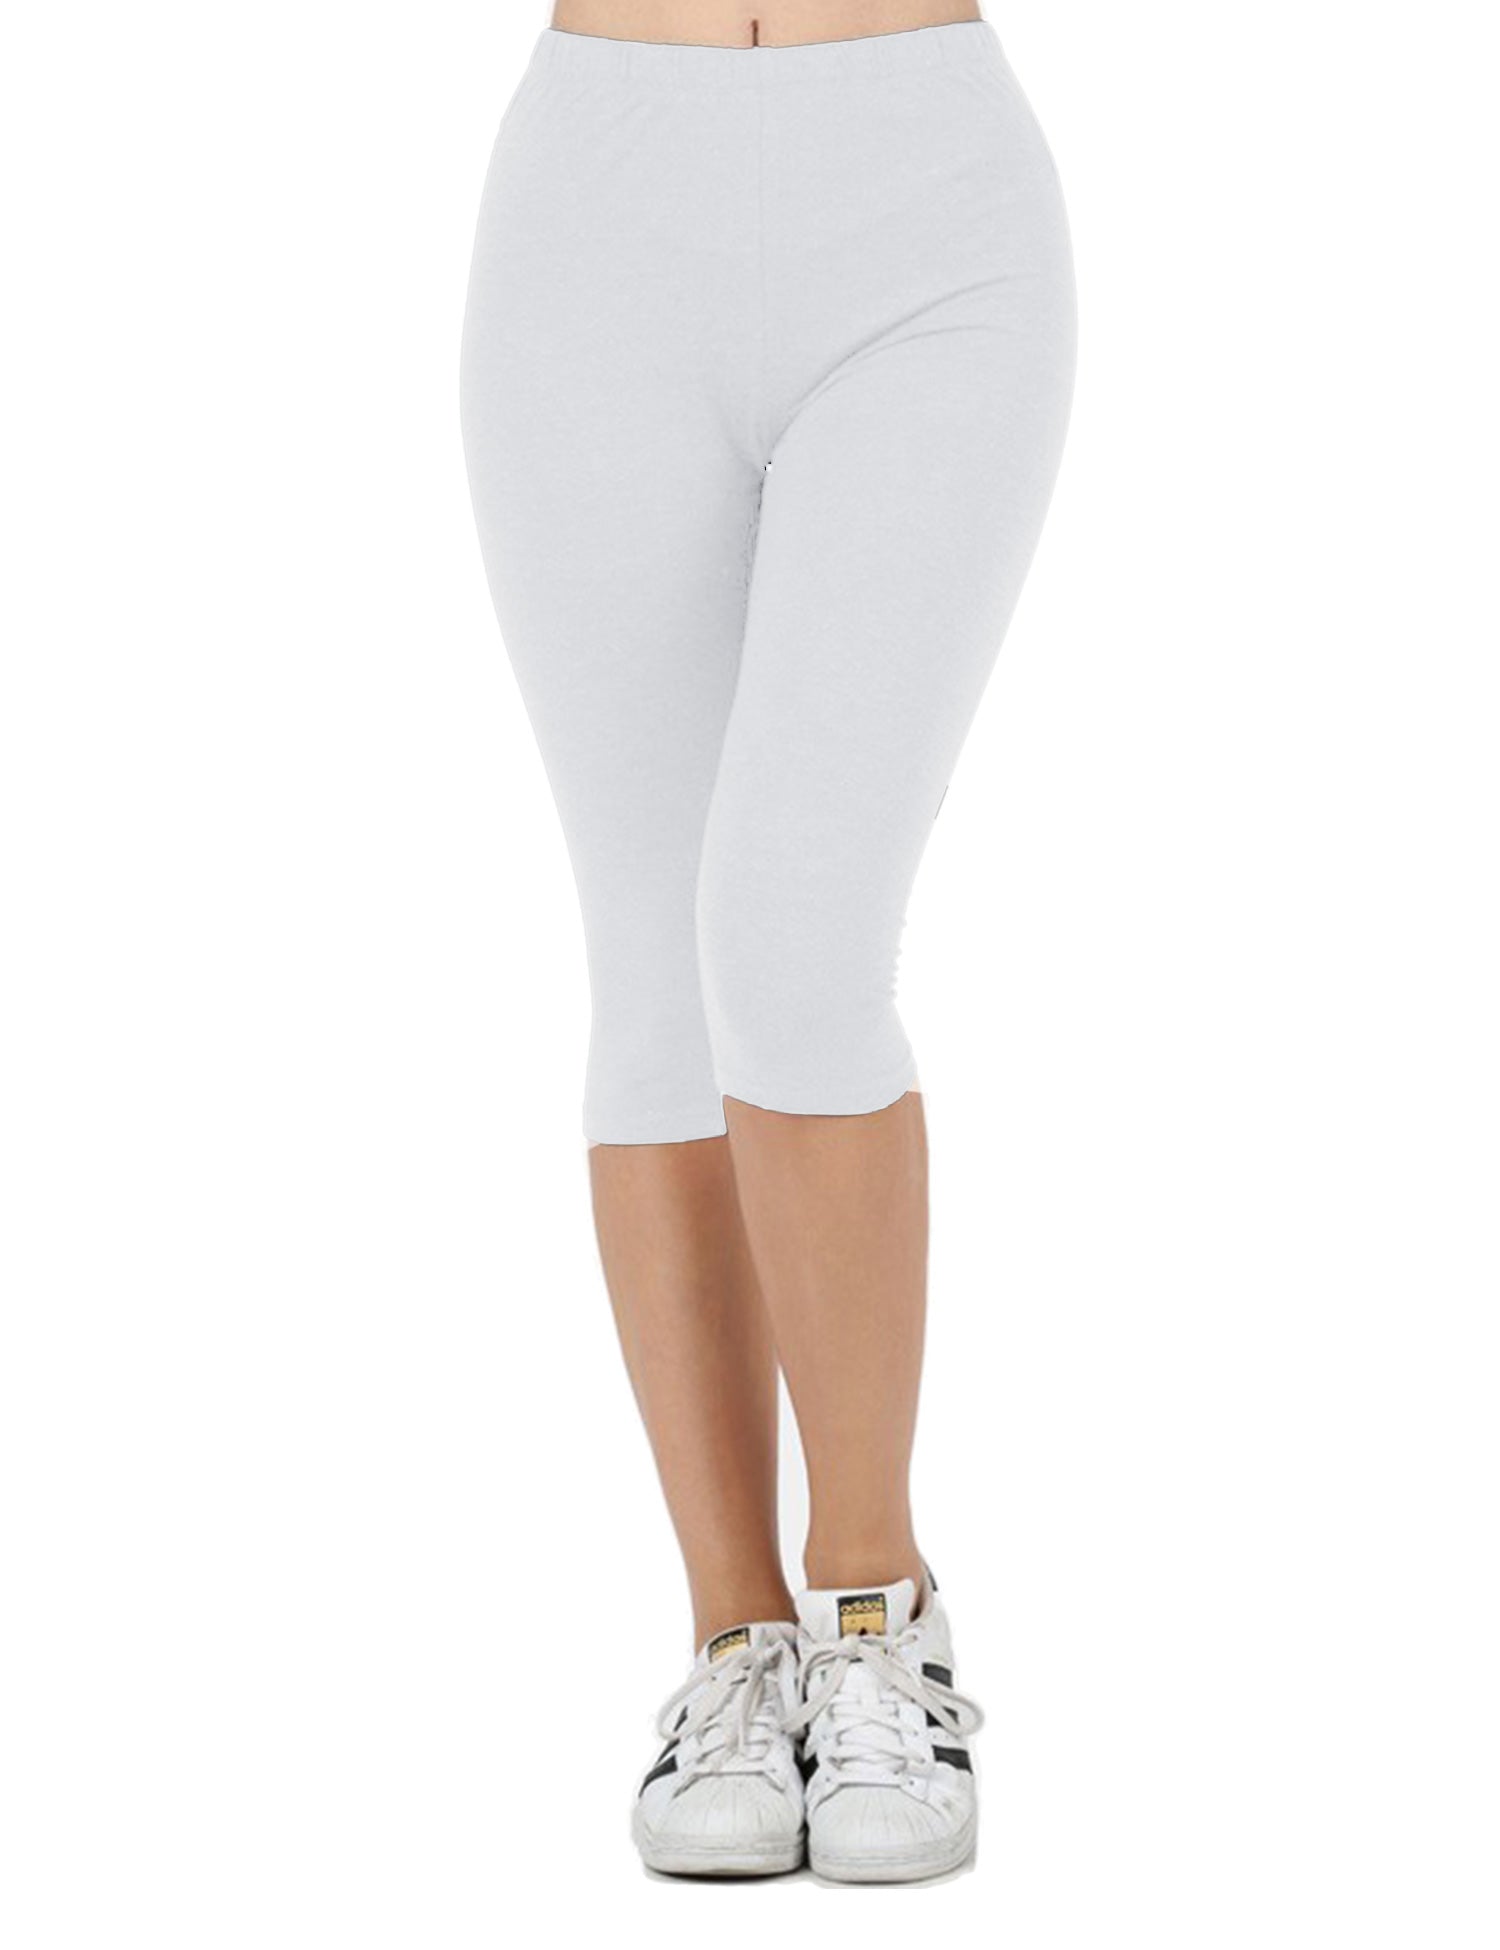 Solid White Capri Leggings w/ Pockets by ML&M – Boujee Brittany